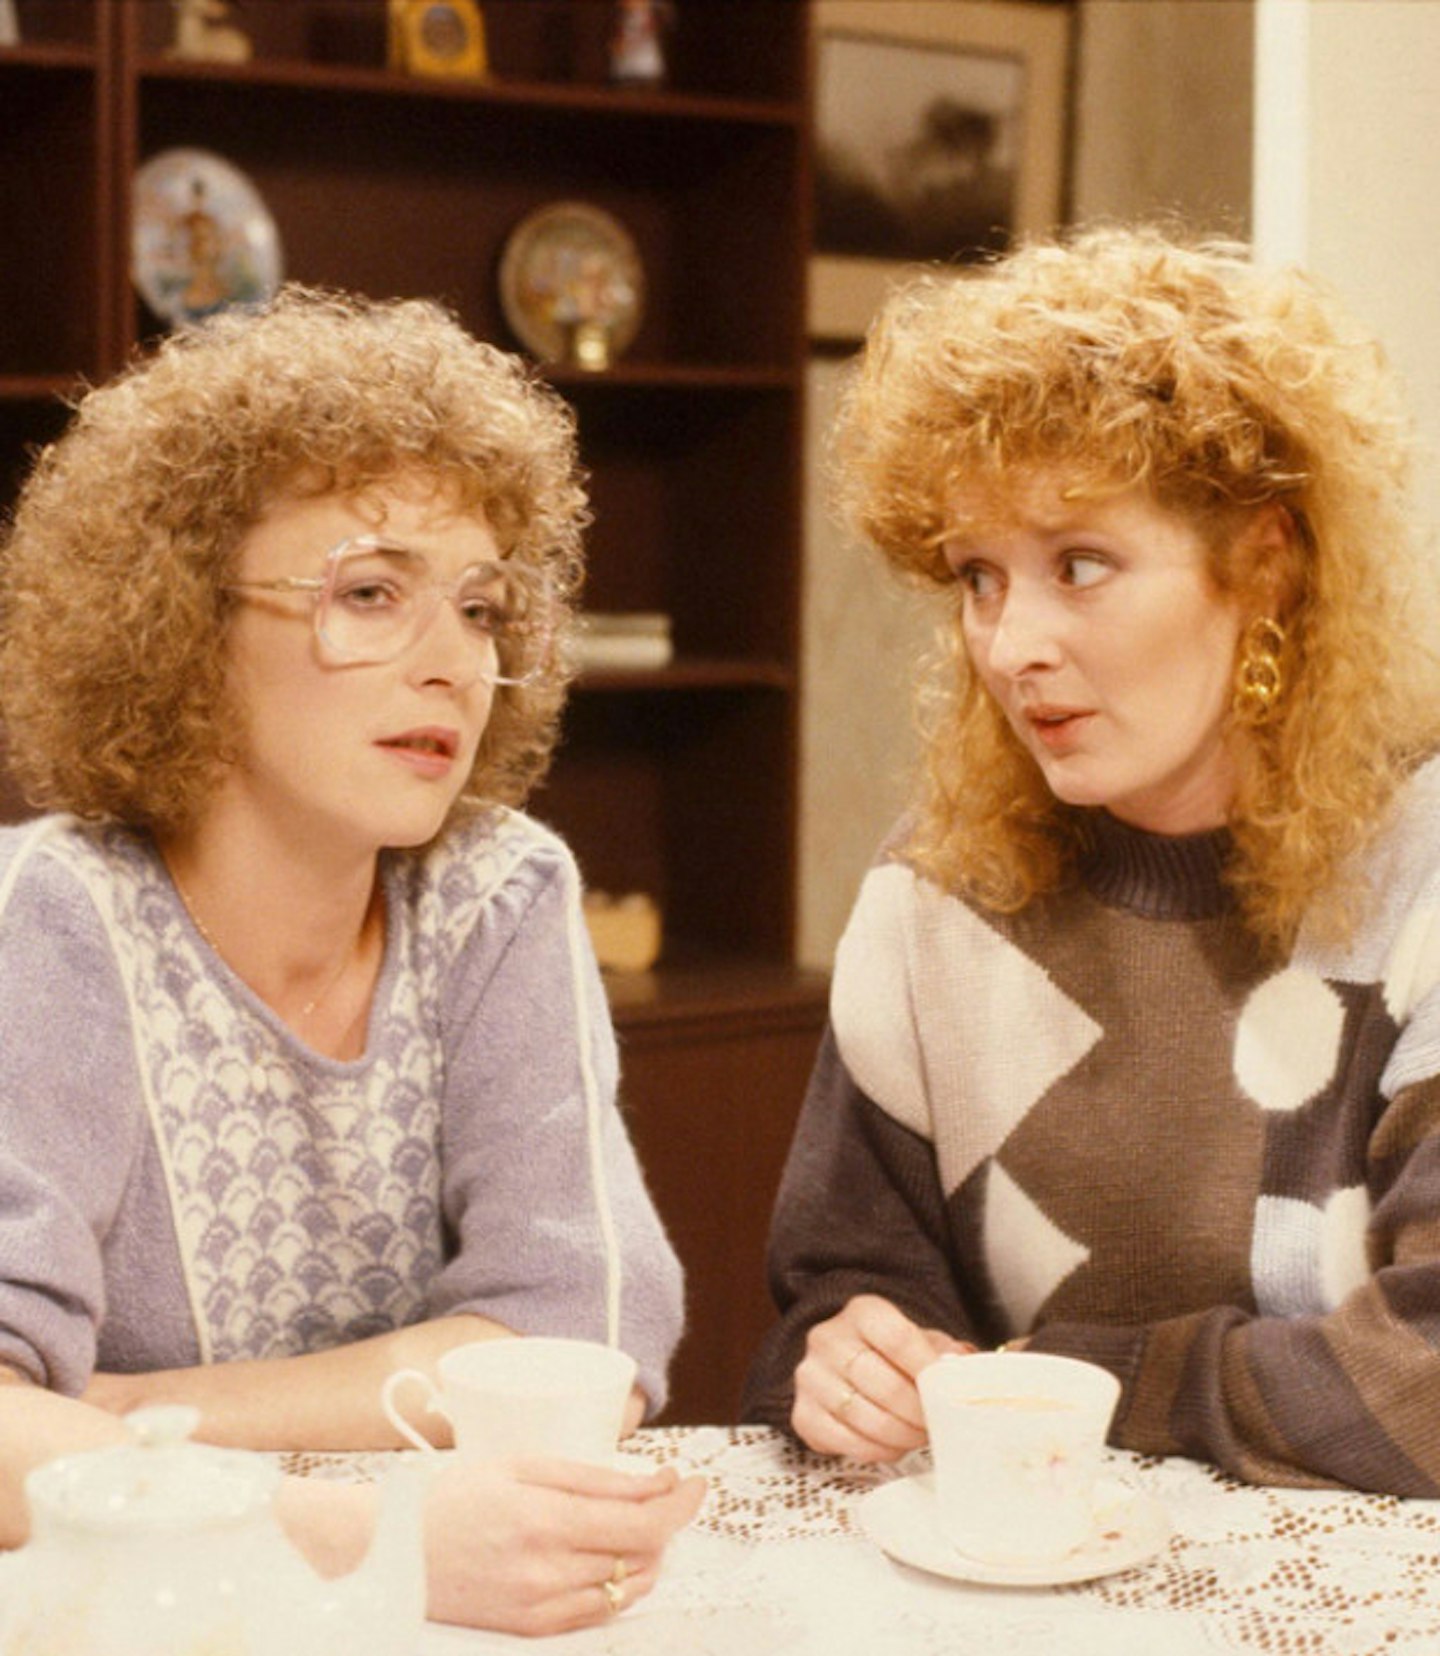 Back in the day, Deirdre and good friend Liz McDonald both favoured a perm